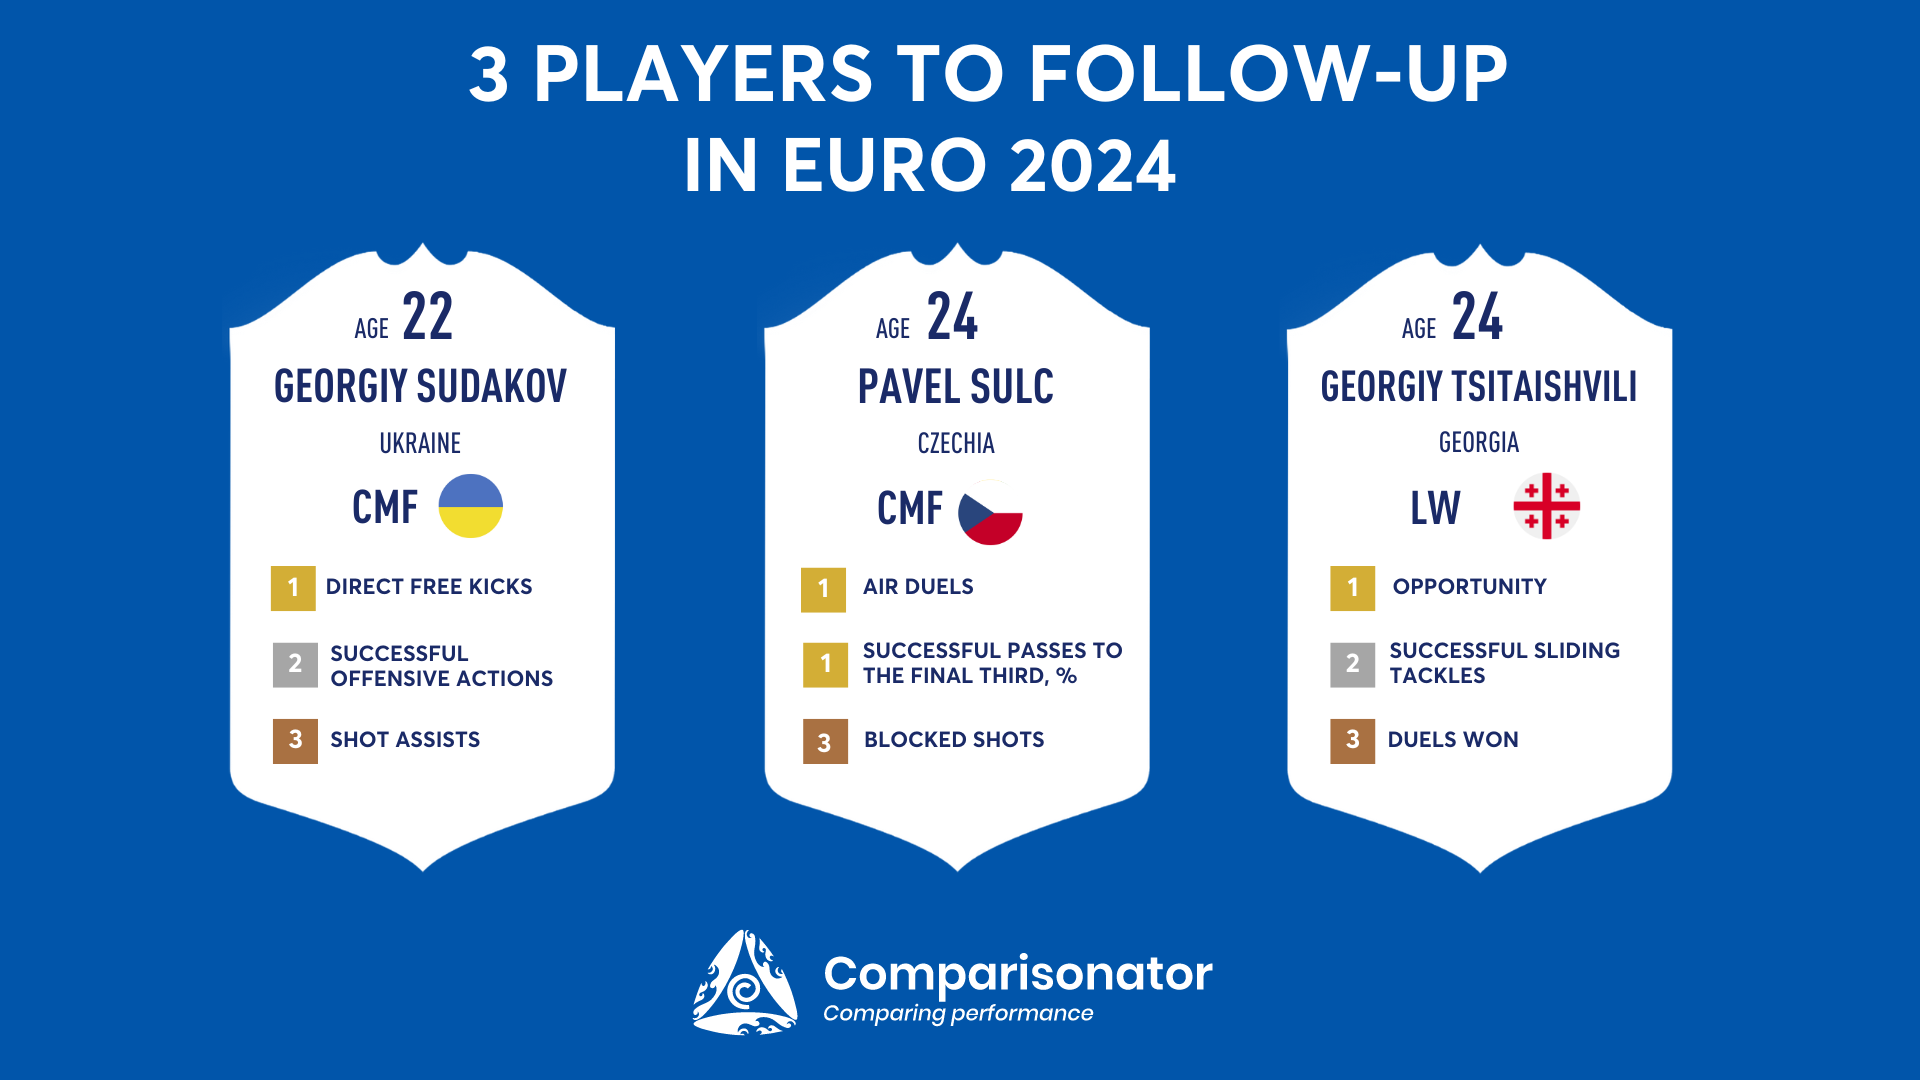 TOP 3 players to Follow-Up in EURO 2024 So Far